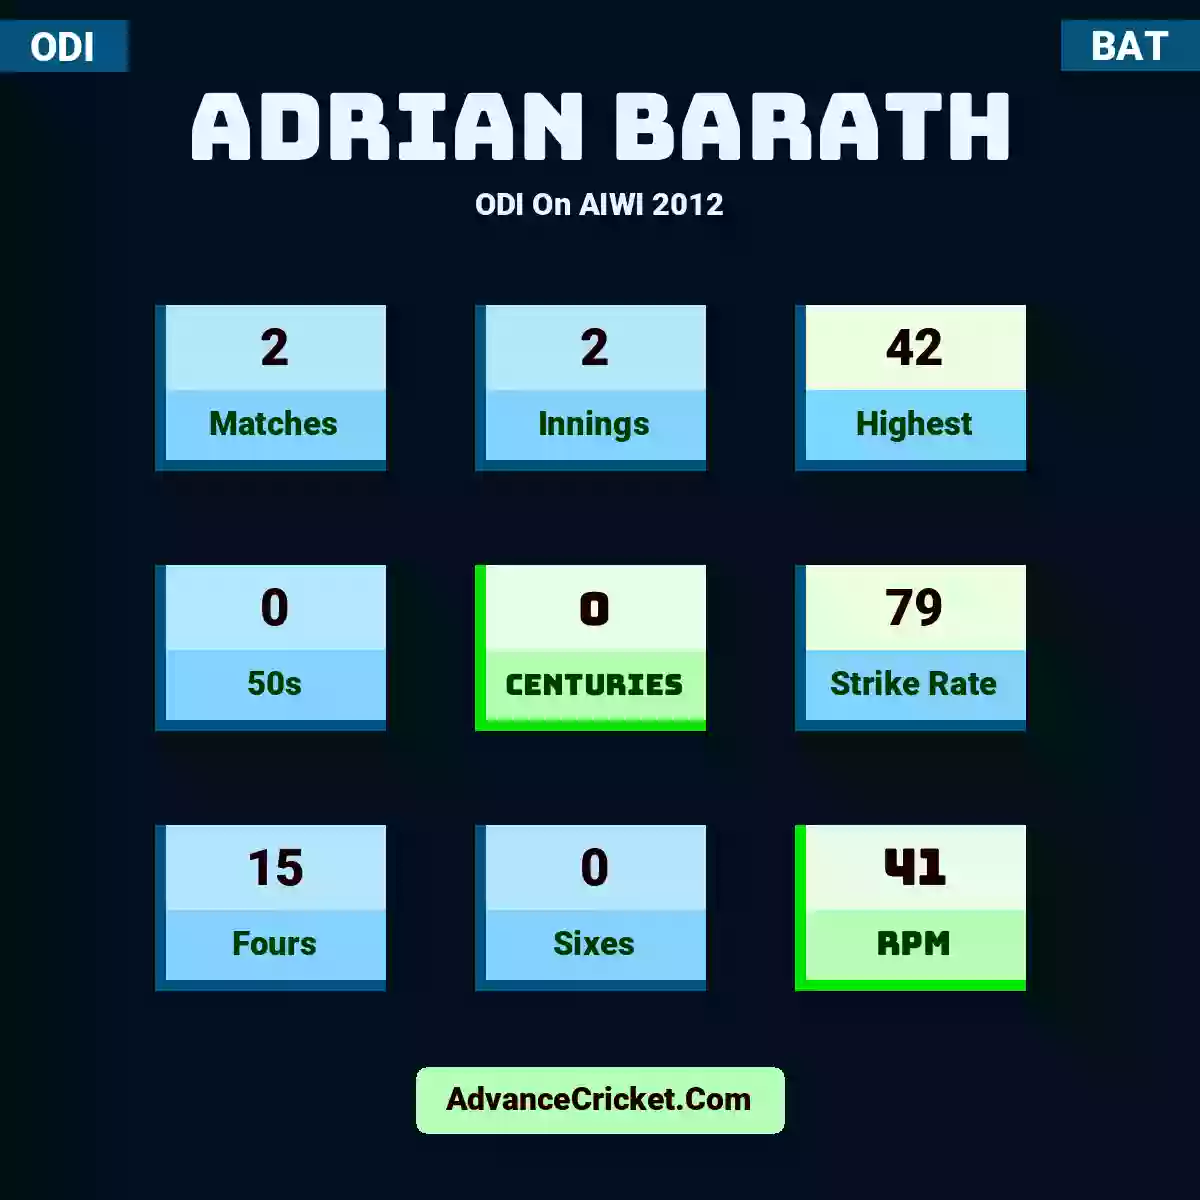 Adrian Barath ODI  On AIWI 2012, Adrian Barath played 2 matches, scored 42 runs as highest, 0 half-centuries, and 0 centuries, with a strike rate of 79. A.Barath hit 15 fours and 0 sixes, with an RPM of 41.